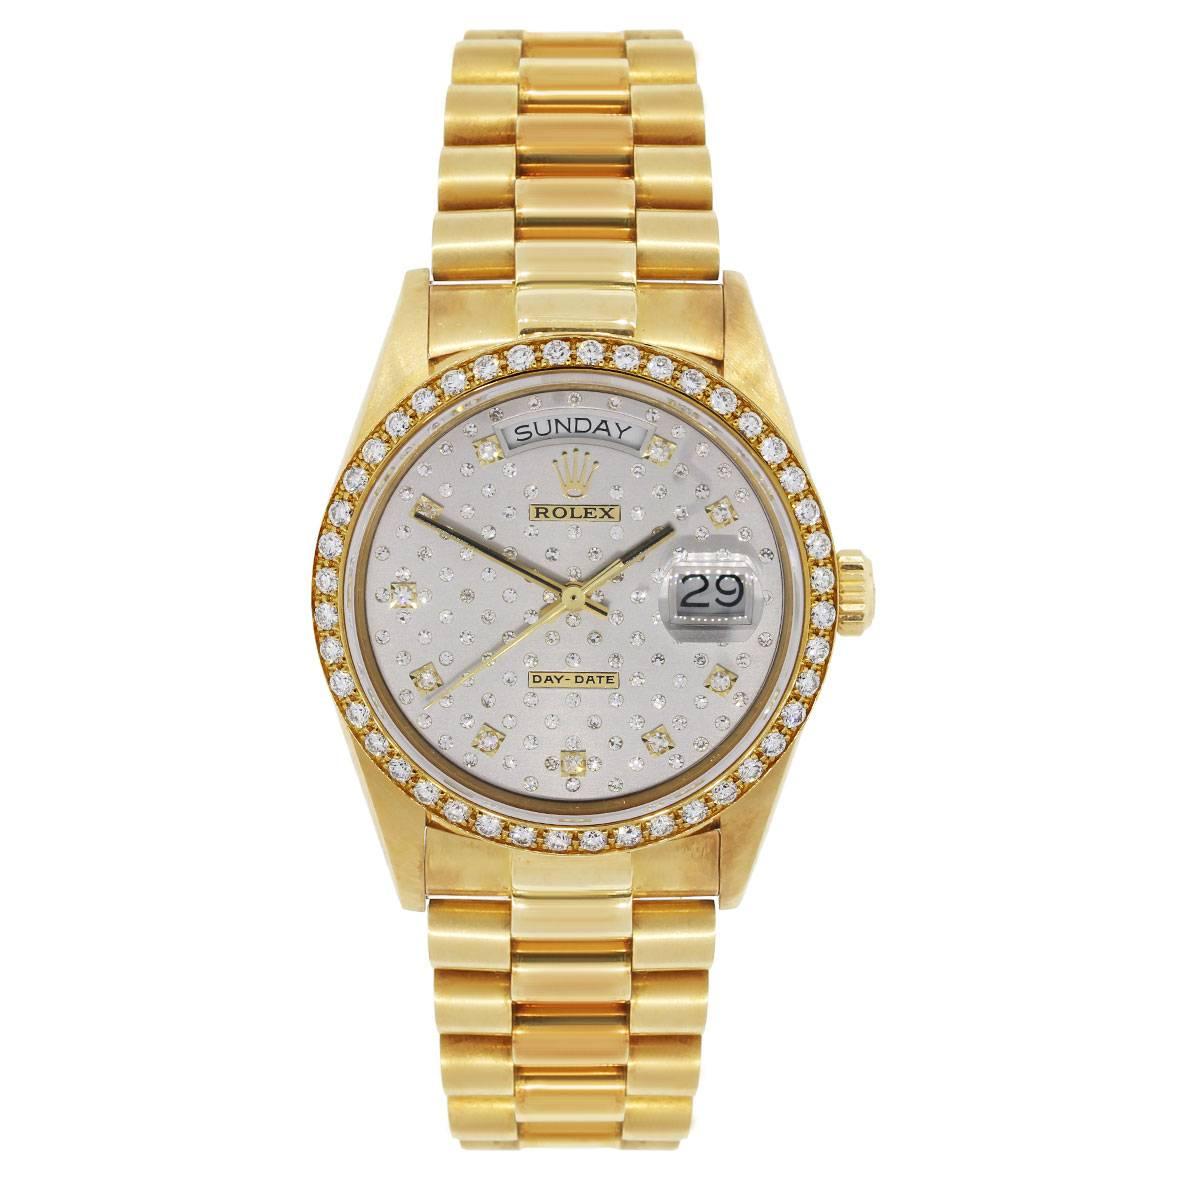 Brand: Rolex
MPN: 18038
Model: Day-Date
Case Material: 18k yellow gold
Case Diameter: 36mm
Crystal: Scratch resistant sapphire
Bezel: Round brilliant diamond bezel (factory)
Dial: Very rare silver pleade diamond dial with day and date window